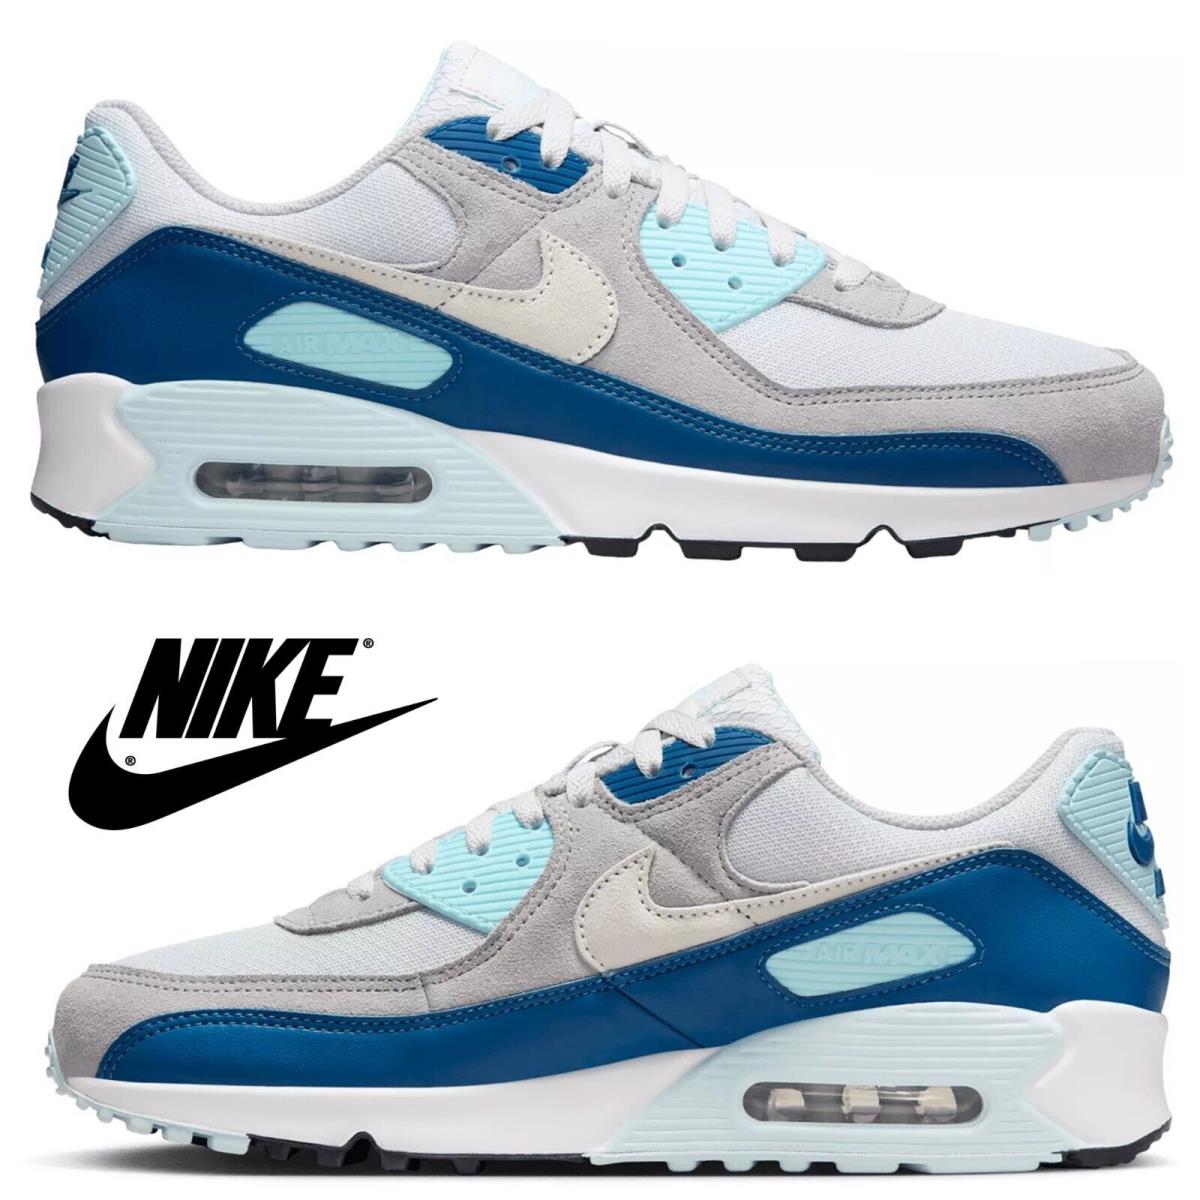 Nike Air Max 90 Shoes Casual Men`s Sneakers Running Athletic Sport Comfort Shoes